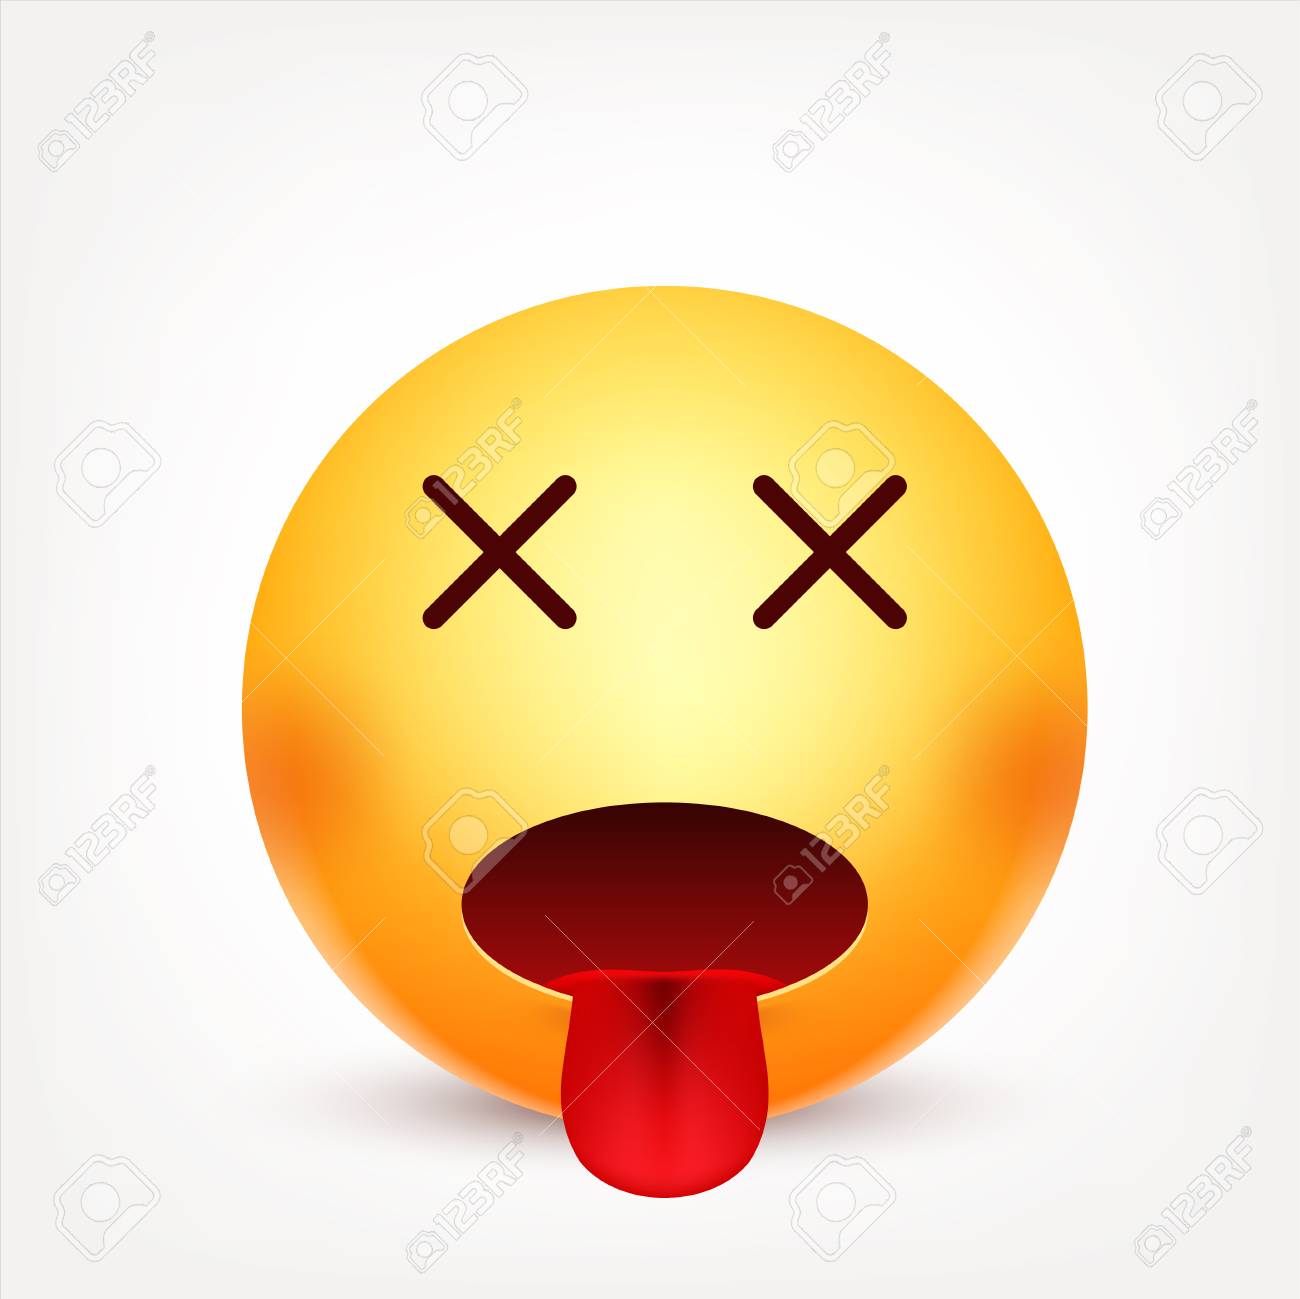 Smiley tired emoticon yellow face with emotions facial expression d realistic emoji funny cartoon charactermood web icon vector illustration royalty free svg cliparts vectors and stock illustration image